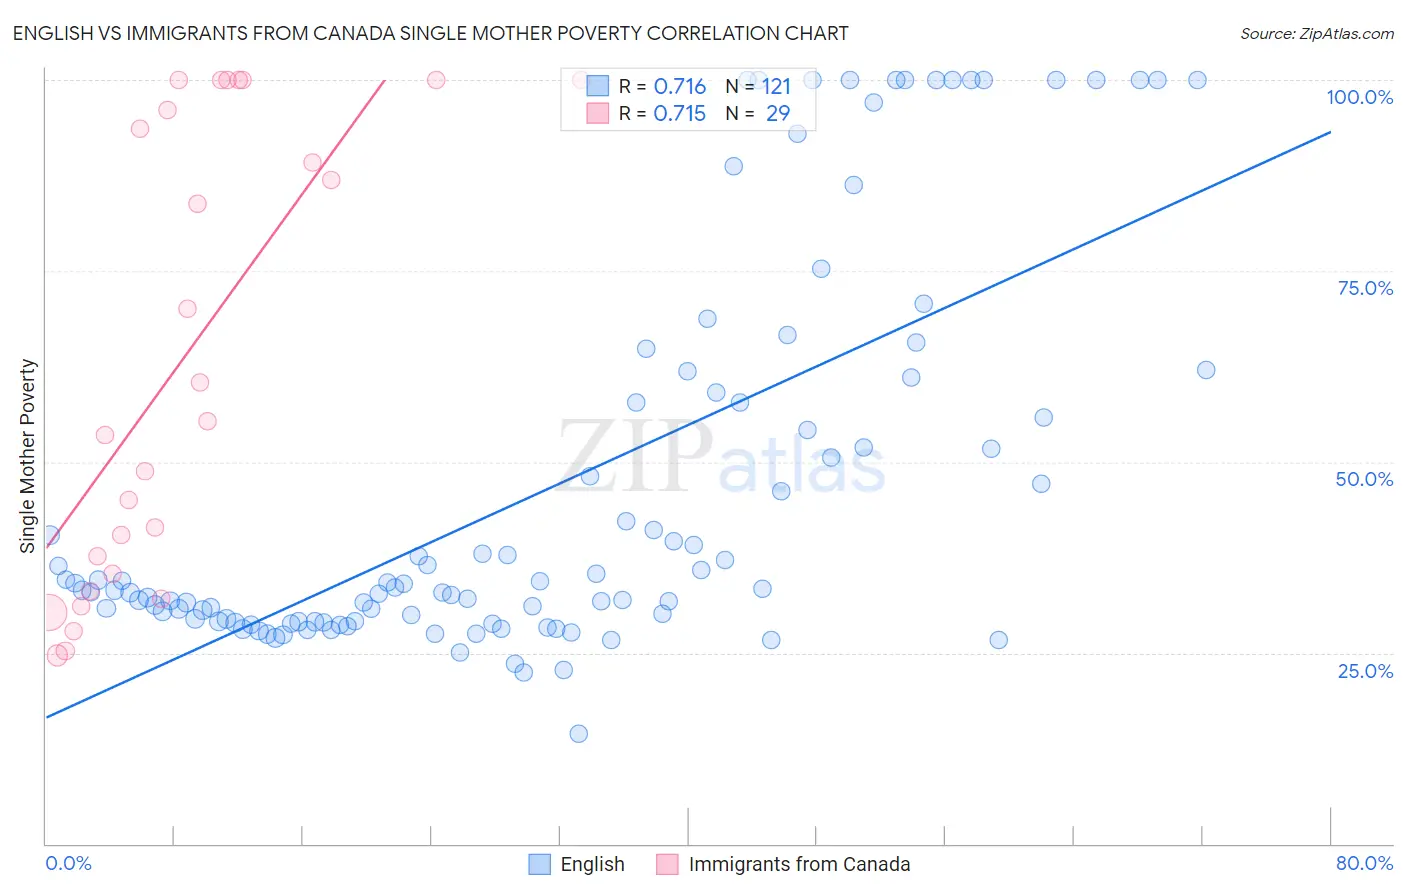 English vs Immigrants from Canada Single Mother Poverty